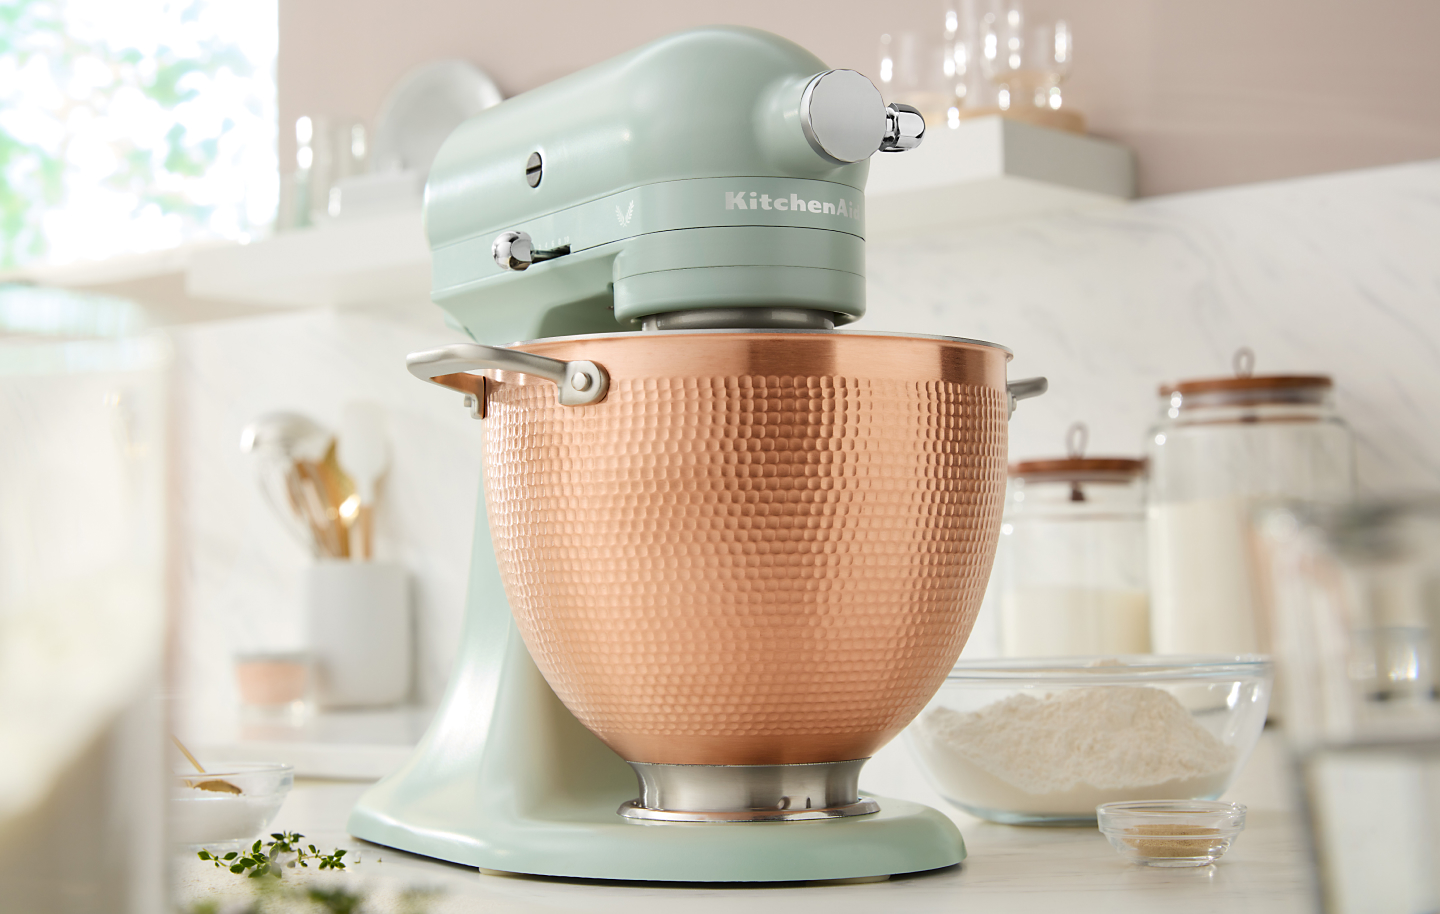 Teal KitchenAid® stand mixer with copper mixing bowl